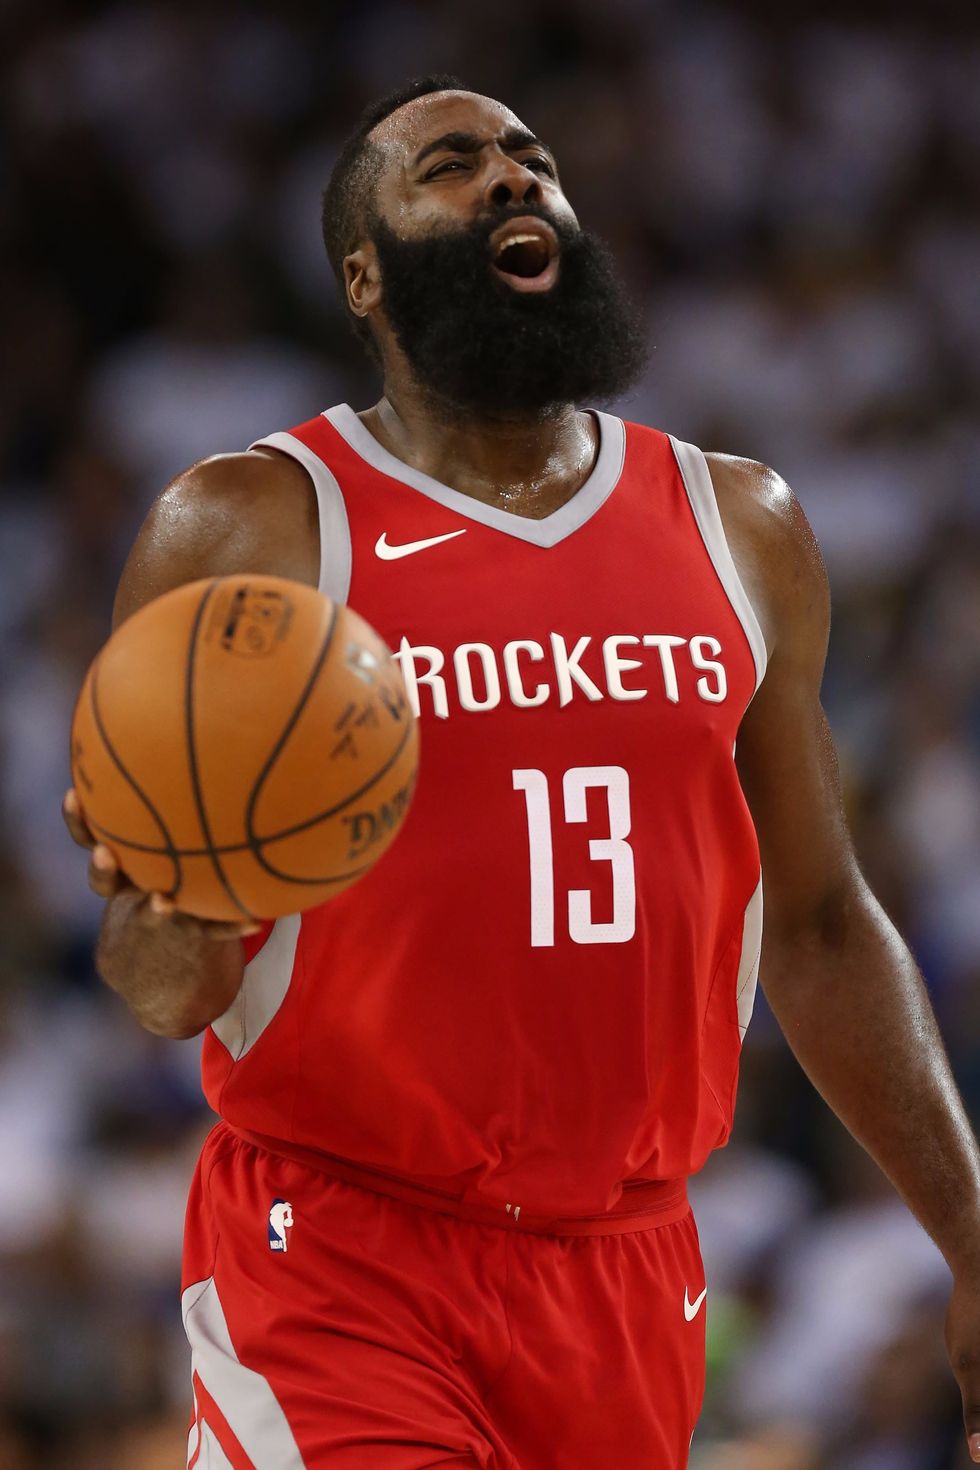 Joel Blank: It's time to sit back and enjoy the ride with the Rockets